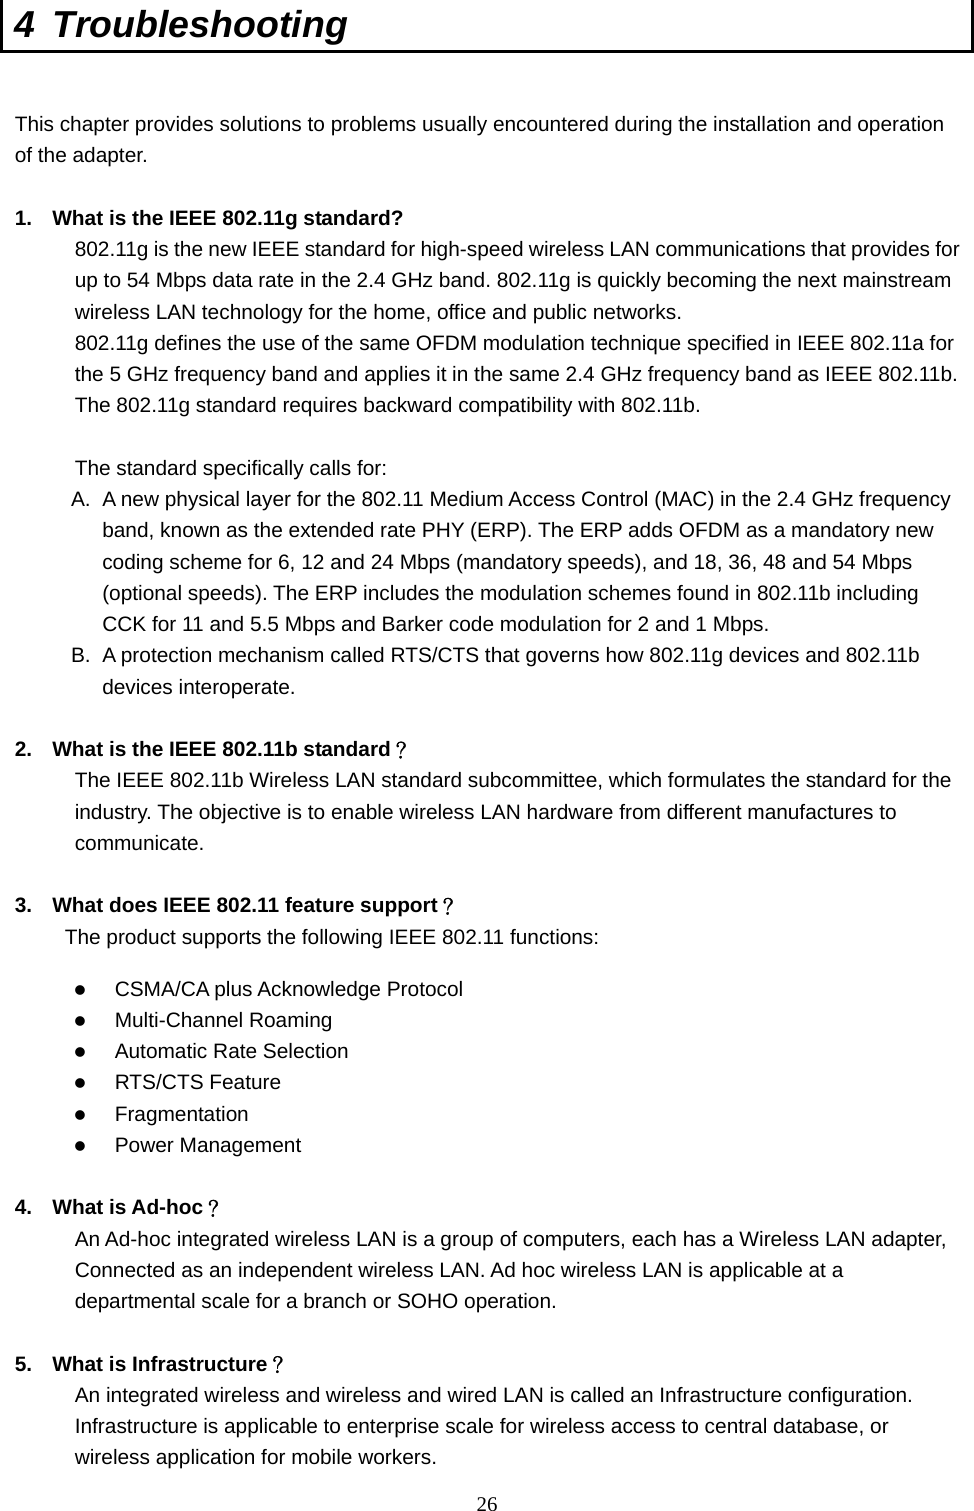  26 4 Troubleshooting  This chapter provides solutions to problems usually encountered during the installation and operation of the adapter.  1.  What is the IEEE 802.11g standard? 802.11g is the new IEEE standard for high-speed wireless LAN communications that provides for up to 54 Mbps data rate in the 2.4 GHz band. 802.11g is quickly becoming the next mainstream wireless LAN technology for the home, office and public networks.   802.11g defines the use of the same OFDM modulation technique specified in IEEE 802.11a for the 5 GHz frequency band and applies it in the same 2.4 GHz frequency band as IEEE 802.11b. The 802.11g standard requires backward compatibility with 802.11b.  The standard specifically calls for:   A.  A new physical layer for the 802.11 Medium Access Control (MAC) in the 2.4 GHz frequency band, known as the extended rate PHY (ERP). The ERP adds OFDM as a mandatory new coding scheme for 6, 12 and 24 Mbps (mandatory speeds), and 18, 36, 48 and 54 Mbps (optional speeds). The ERP includes the modulation schemes found in 802.11b including CCK for 11 and 5.5 Mbps and Barker code modulation for 2 and 1 Mbps. B.  A protection mechanism called RTS/CTS that governs how 802.11g devices and 802.11b devices interoperate.  2.  What is the IEEE 802.11b standard？ The IEEE 802.11b Wireless LAN standard subcommittee, which formulates the standard for the industry. The objective is to enable wireless LAN hardware from different manufactures to communicate.  3.  What does IEEE 802.11 feature support？ The product supports the following IEEE 802.11 functions:  CSMA/CA plus Acknowledge Protocol  Multi-Channel Roaming  Automatic Rate Selection  RTS/CTS Feature  Fragmentation  Power Management  4. What is Ad-hoc？ An Ad-hoc integrated wireless LAN is a group of computers, each has a Wireless LAN adapter, Connected as an independent wireless LAN. Ad hoc wireless LAN is applicable at a departmental scale for a branch or SOHO operation.  5.  What is Infrastructure？ An integrated wireless and wireless and wired LAN is called an Infrastructure configuration. Infrastructure is applicable to enterprise scale for wireless access to central database, or wireless application for mobile workers. 